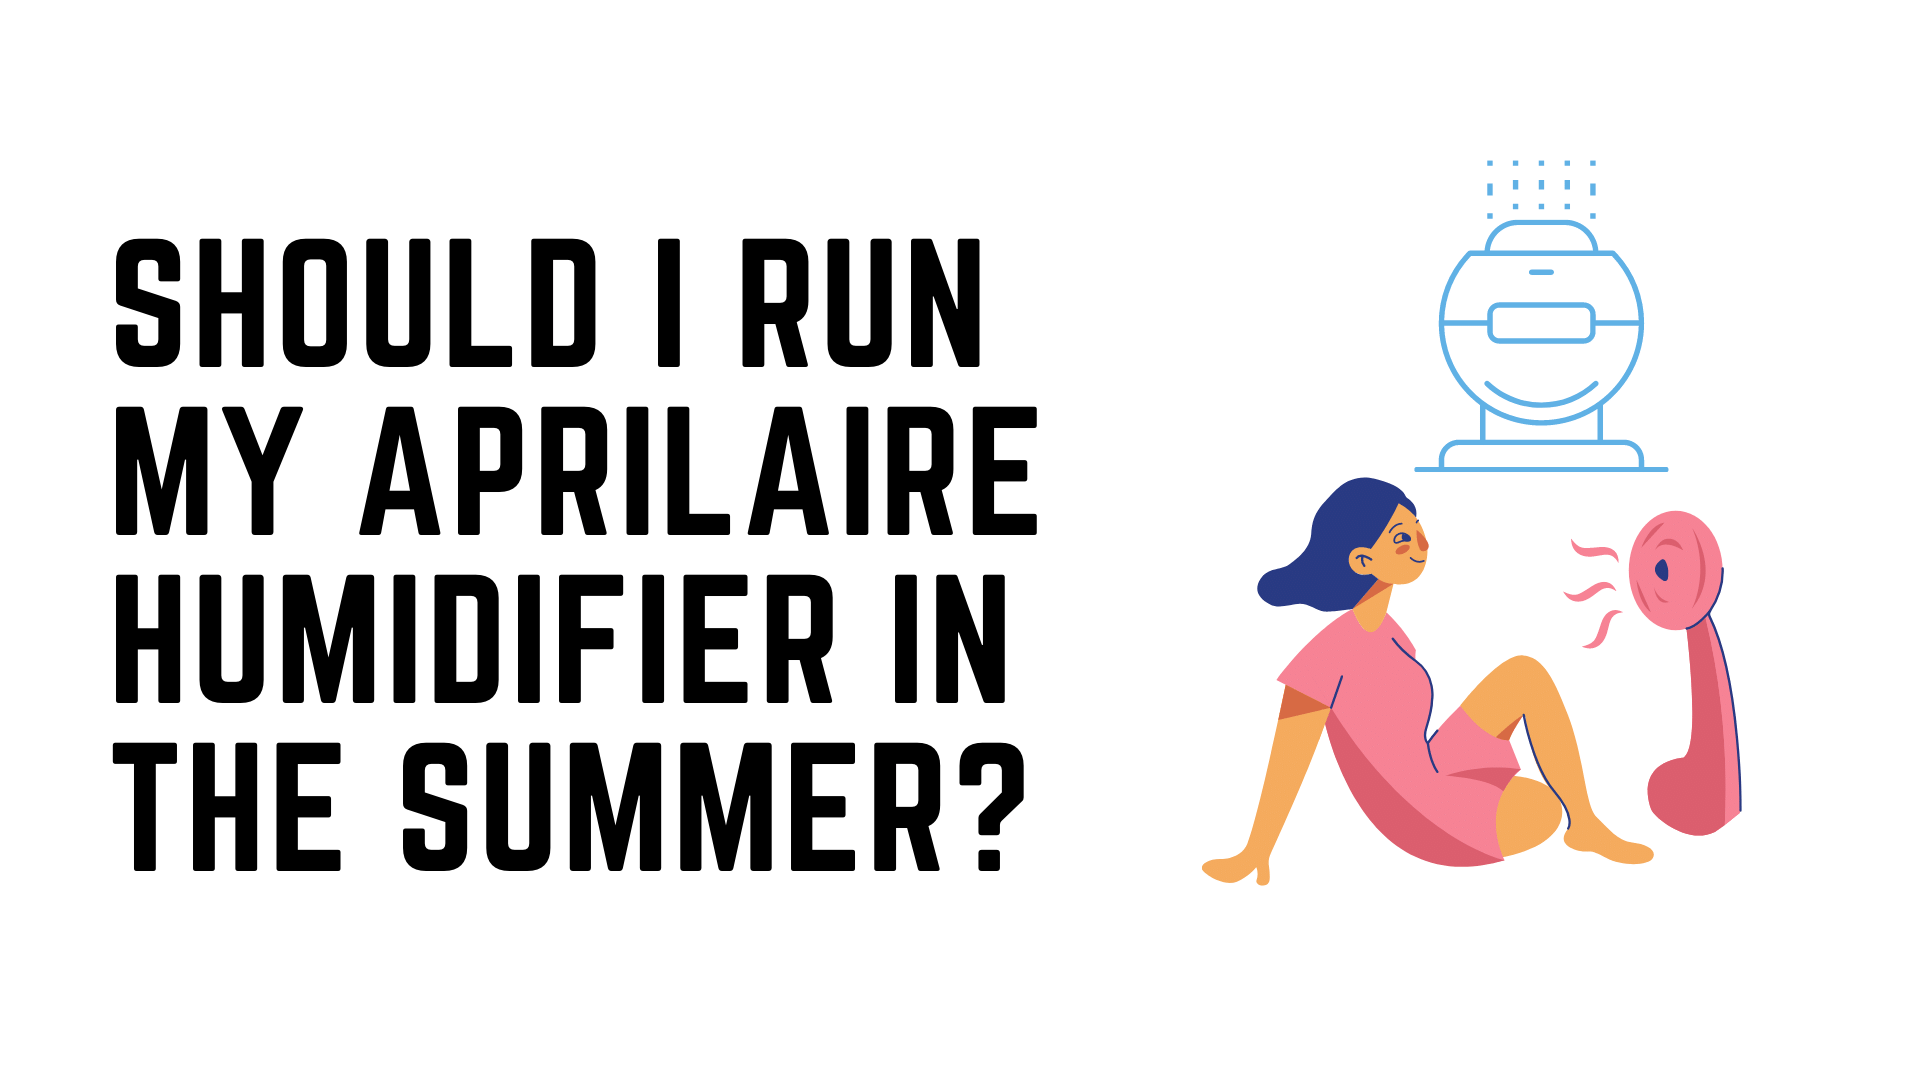 Should I Run My Aprilaire Humidifier In The Summer?